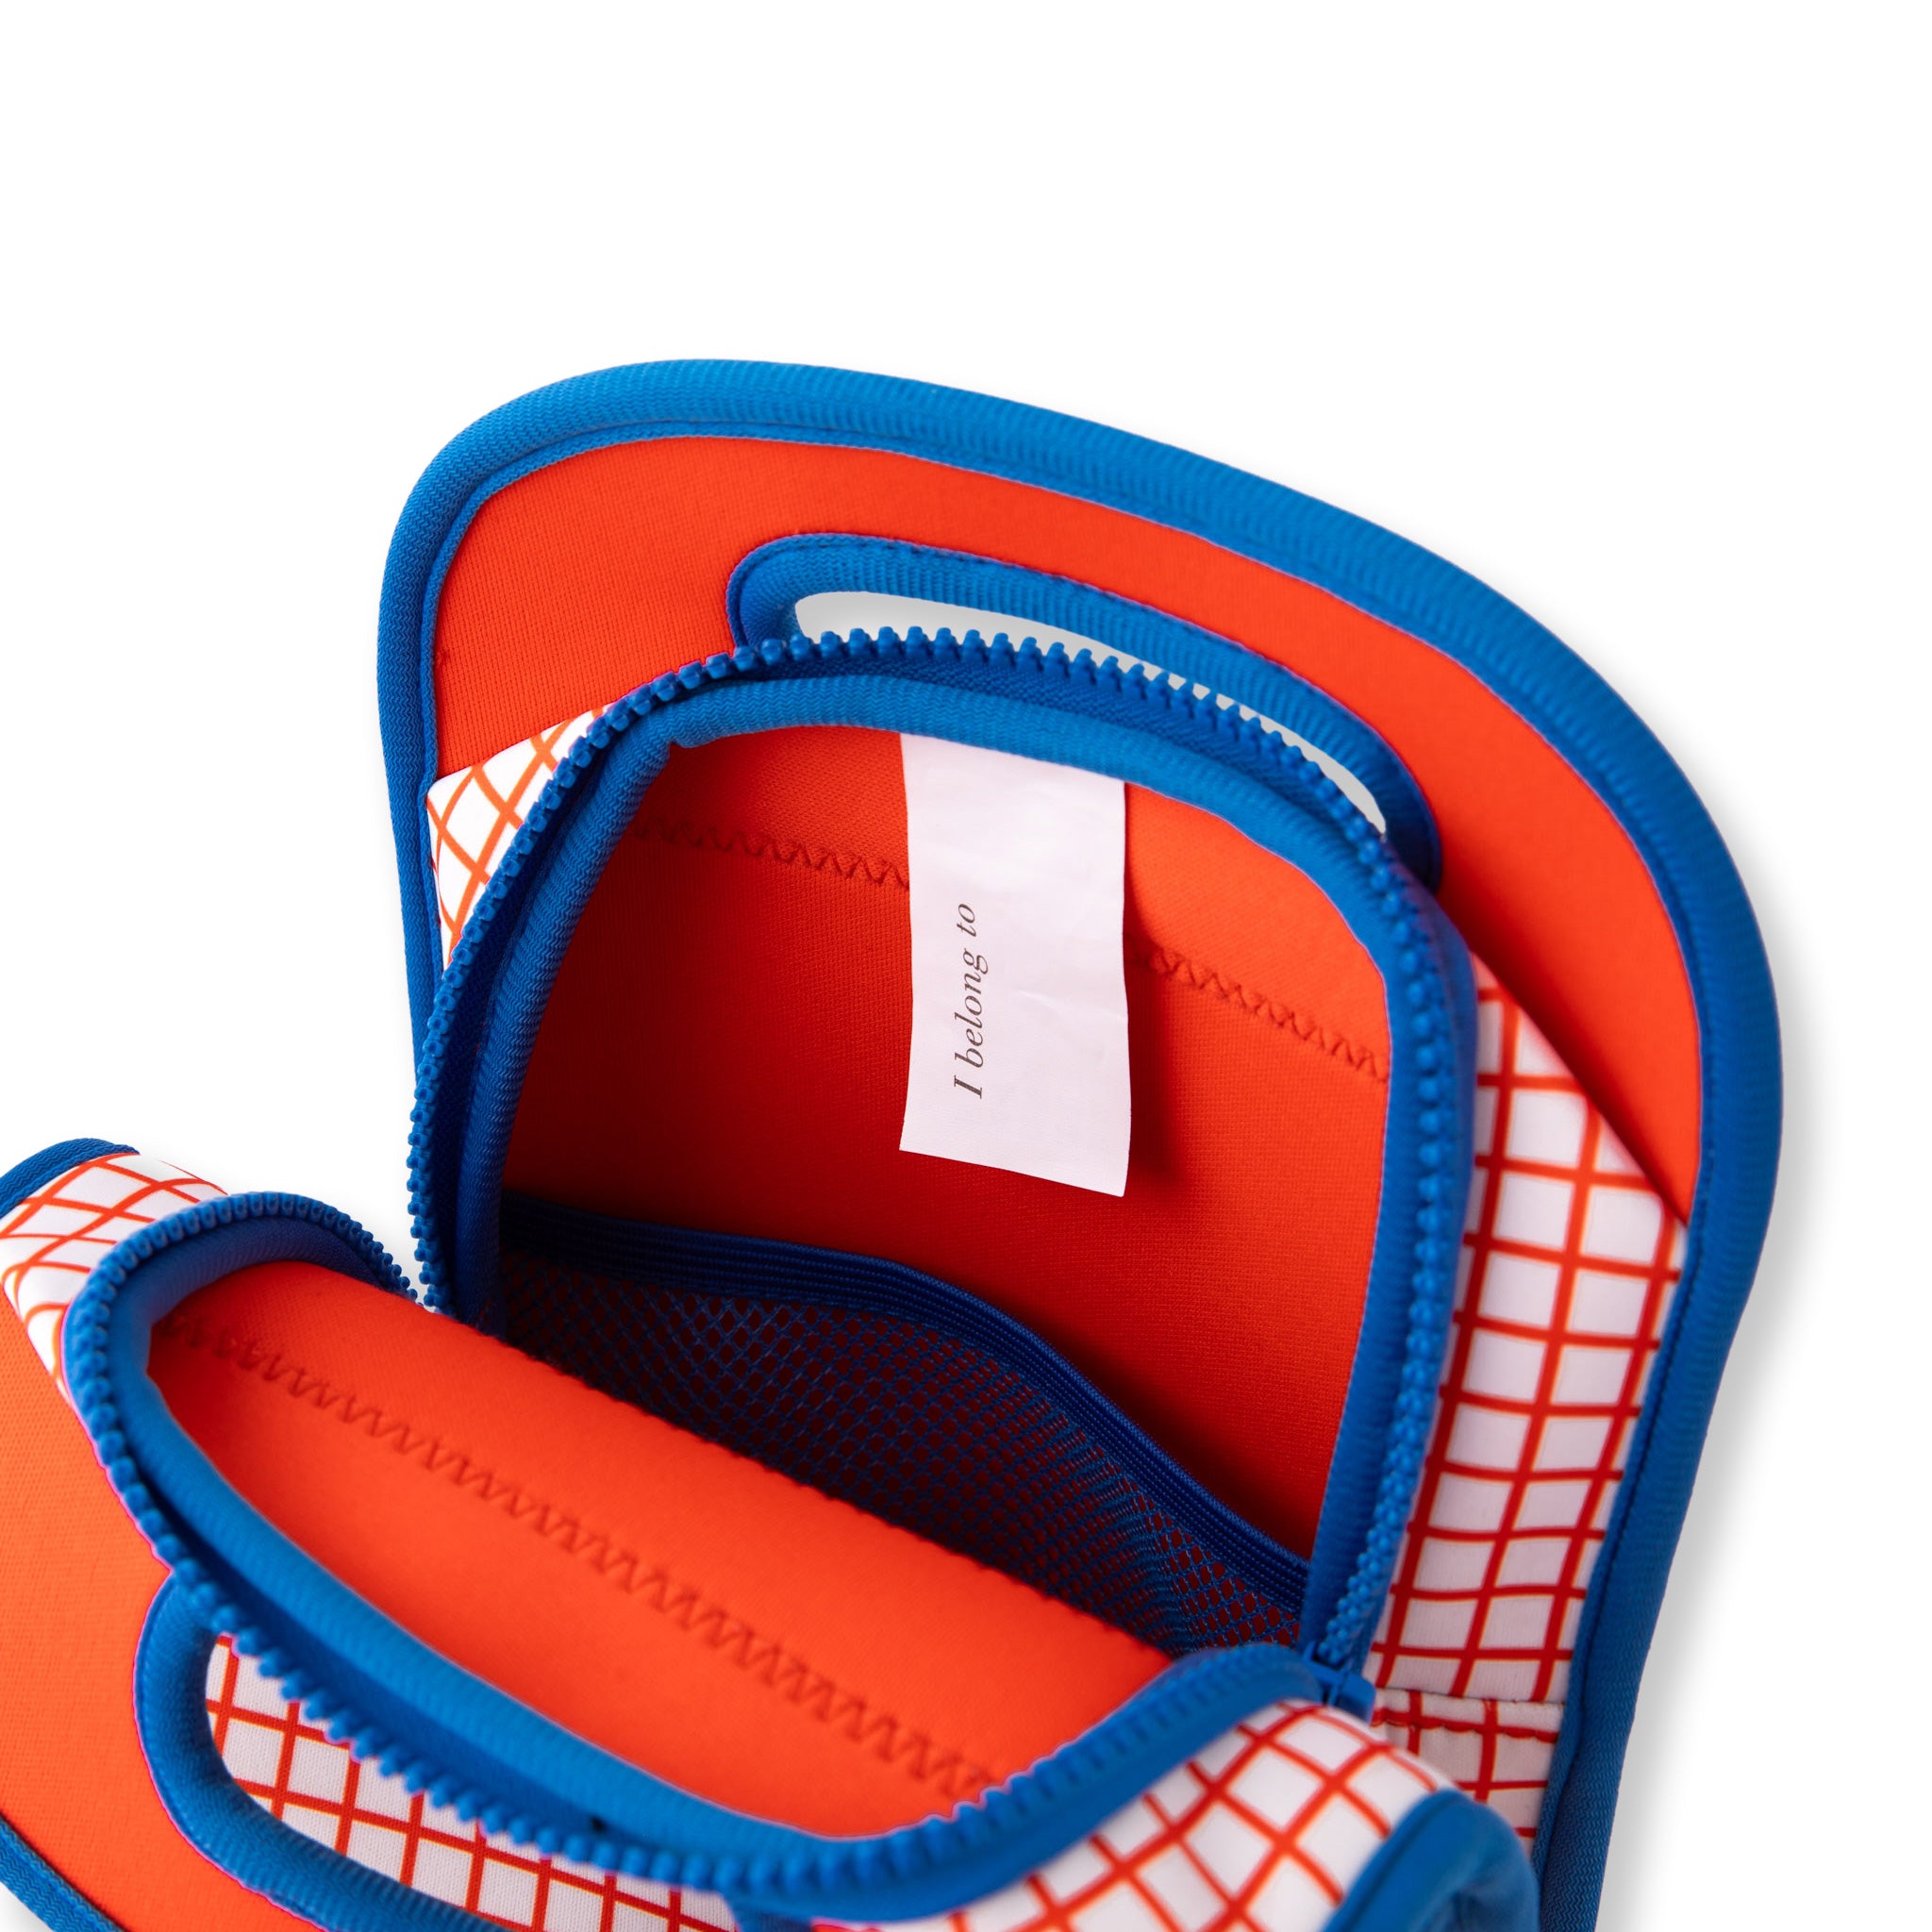 neoprene insulated lunch bag bright orange grid pattern and bright blue binding - nudie rudie lunch box